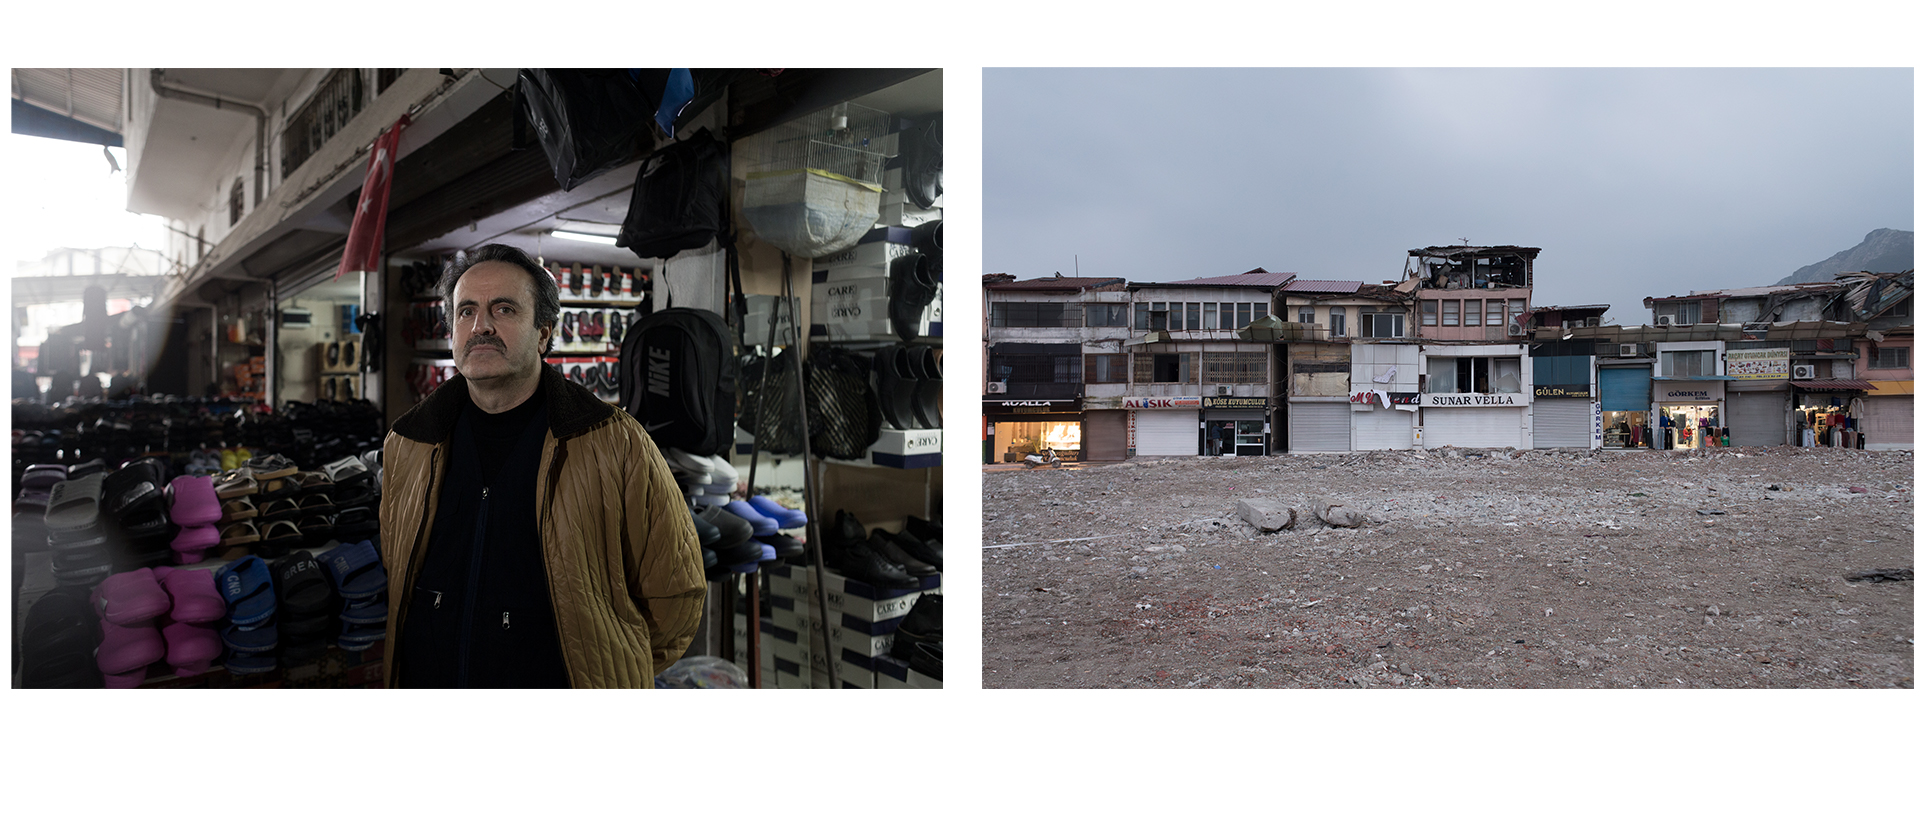 On the left, Adam Sabit stands next to his stall. On the right is the main bazaar of Antakya. (Kyriakos Finas)